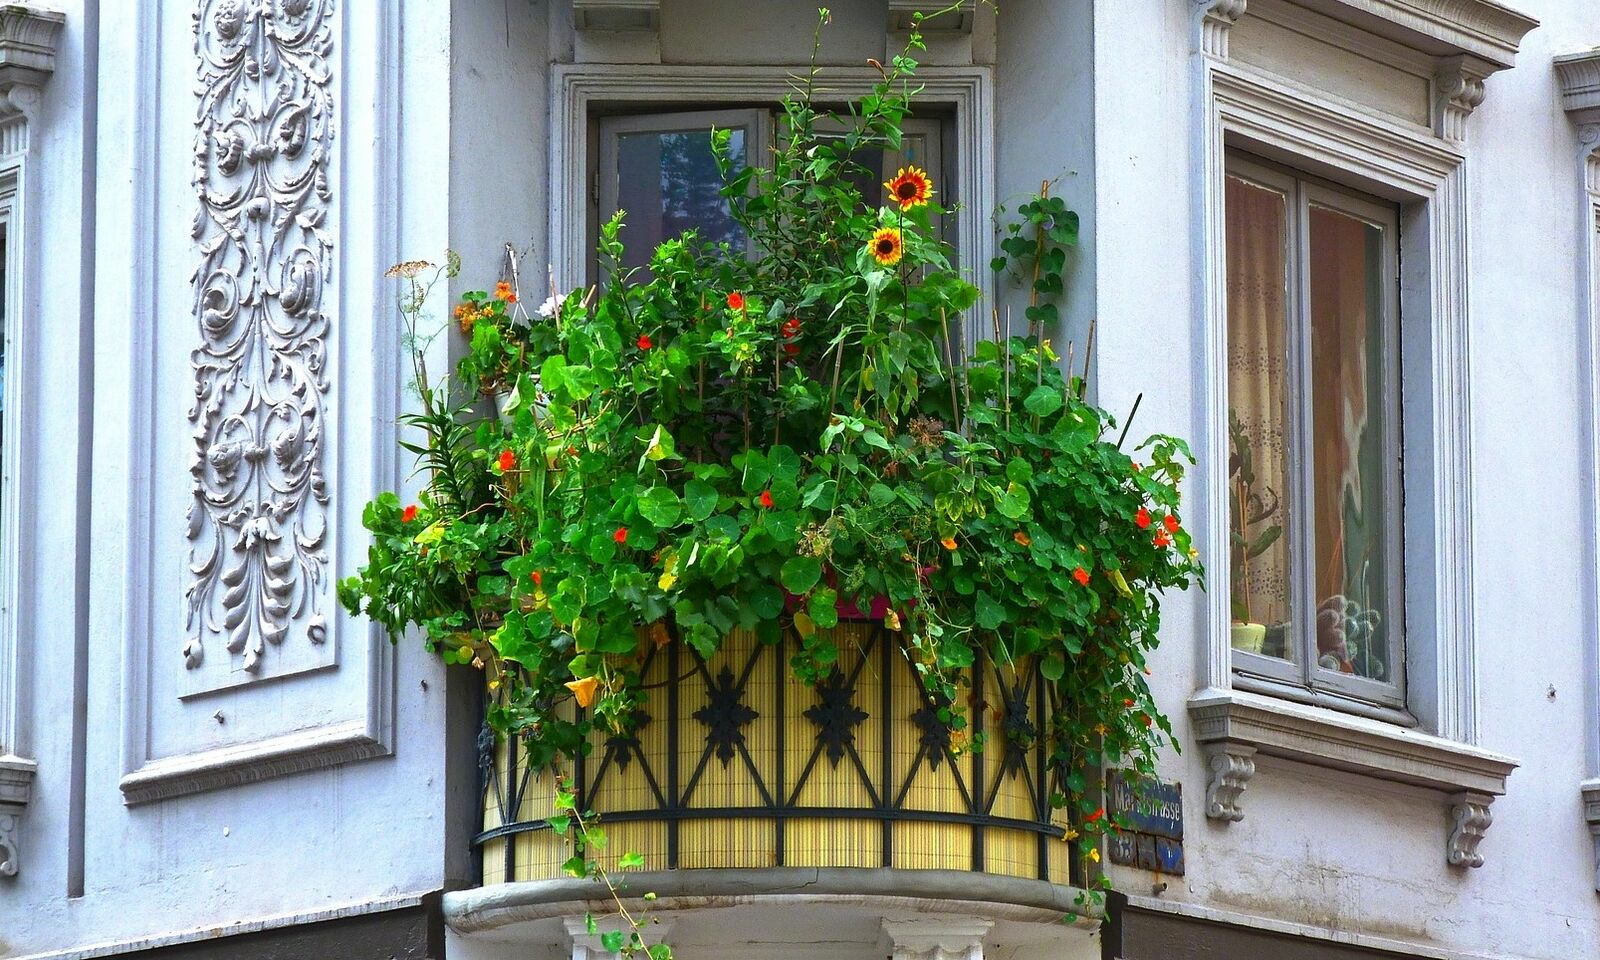 Balcony garden: Ideas for pots, window boxes and raised beds